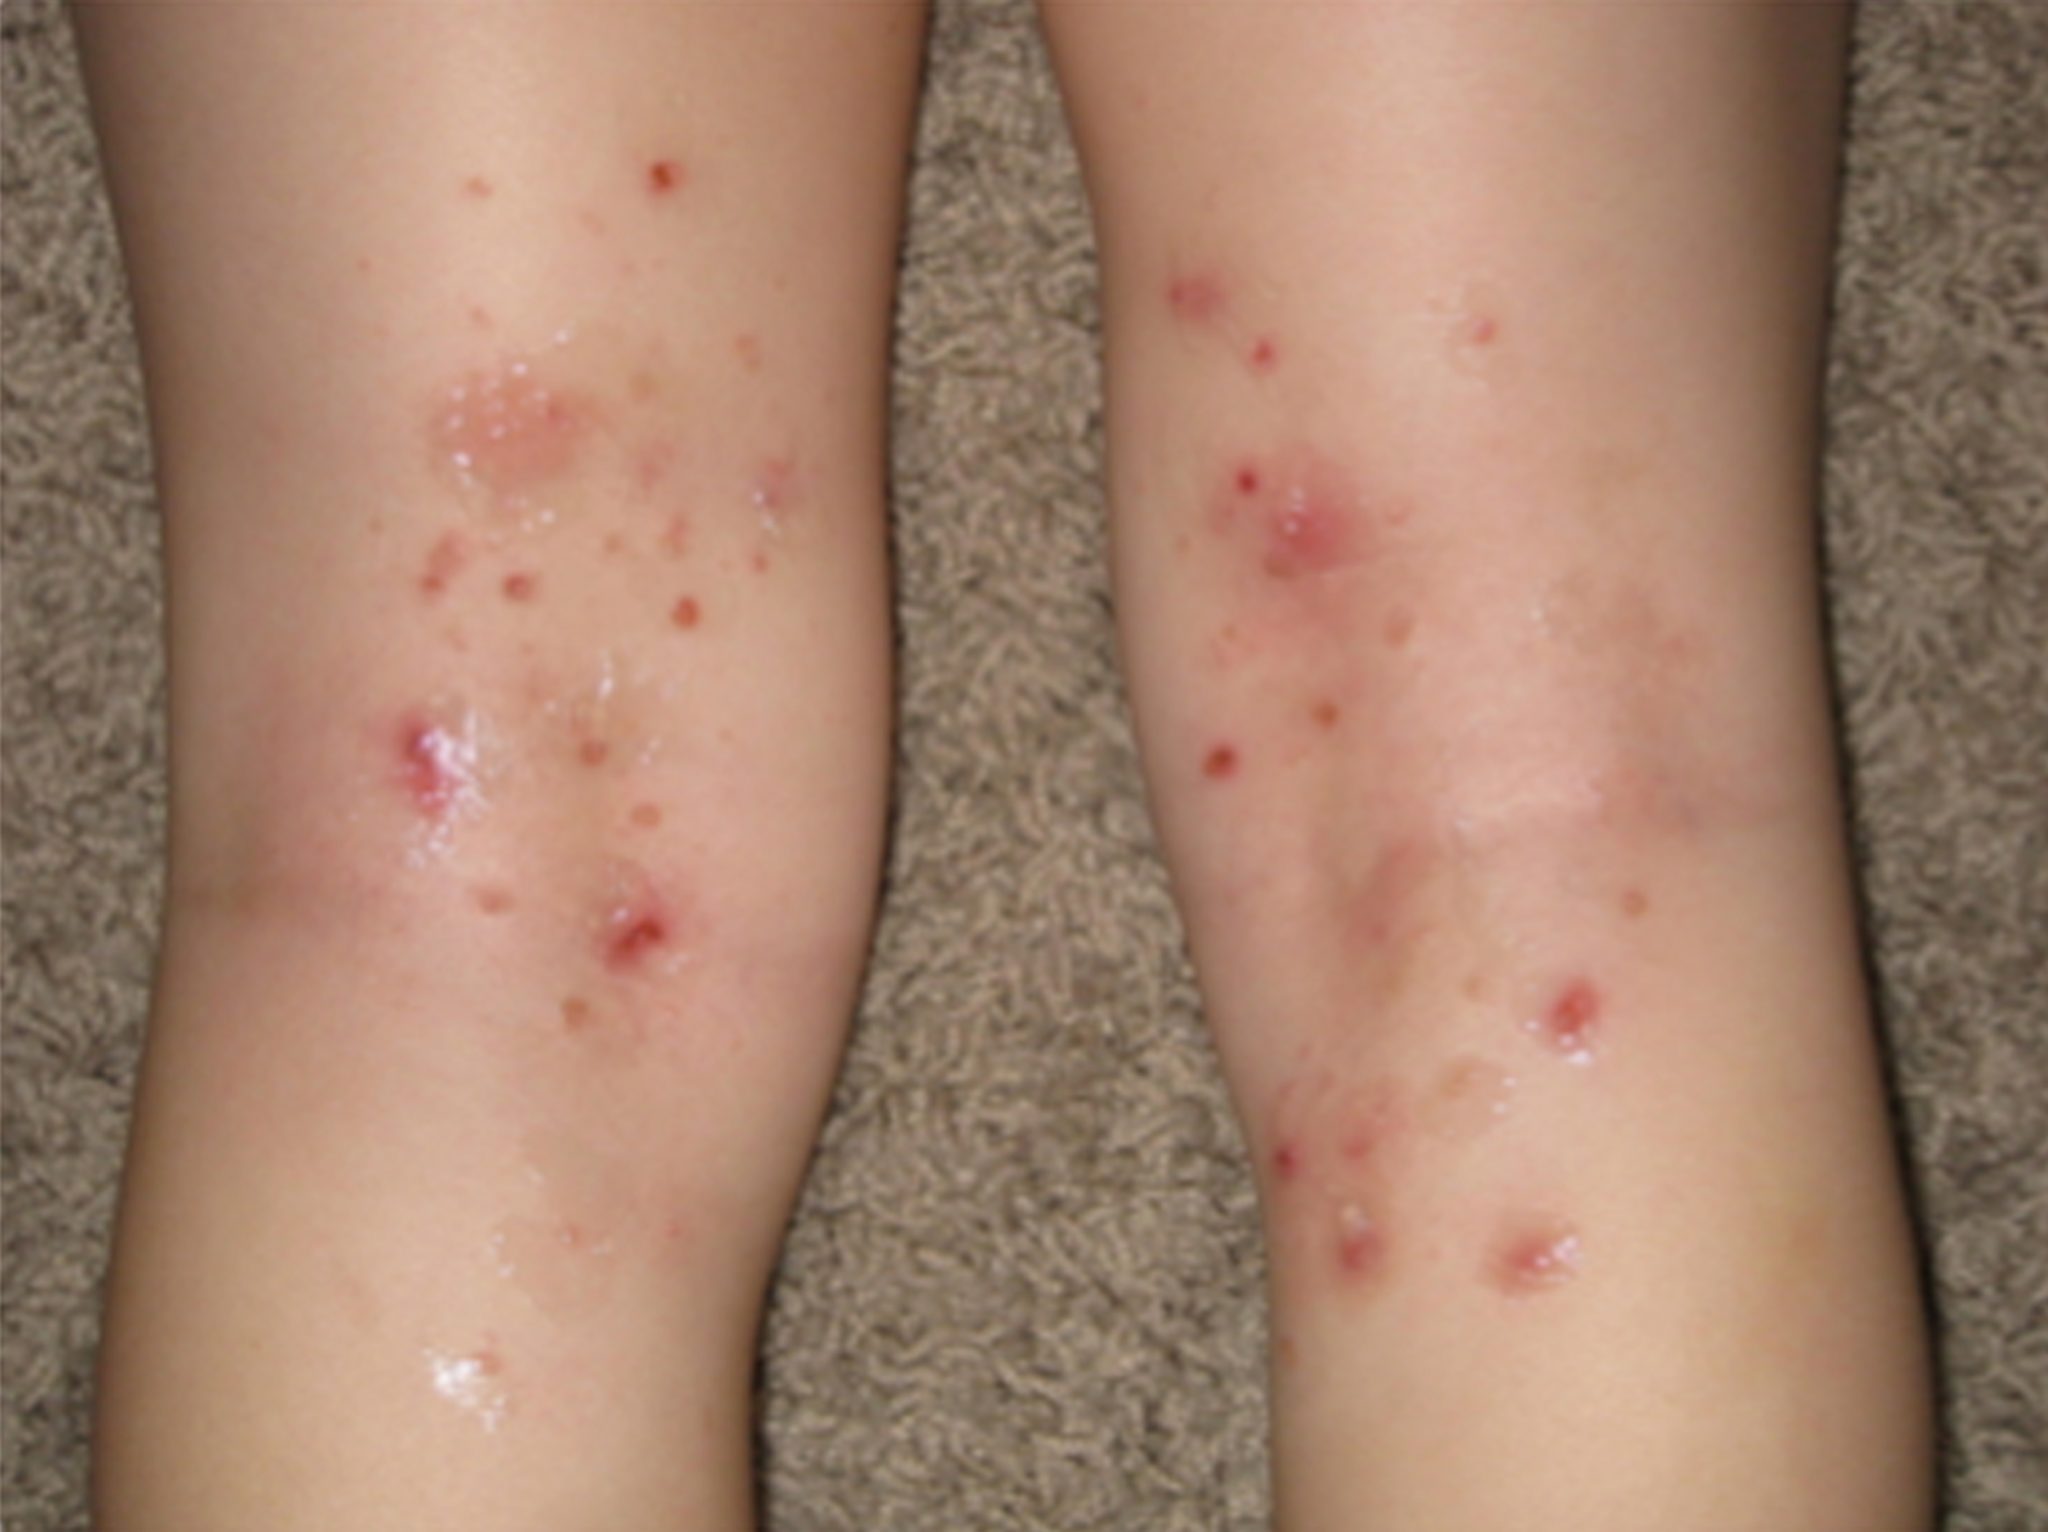 Pictures of Eczema on Legs